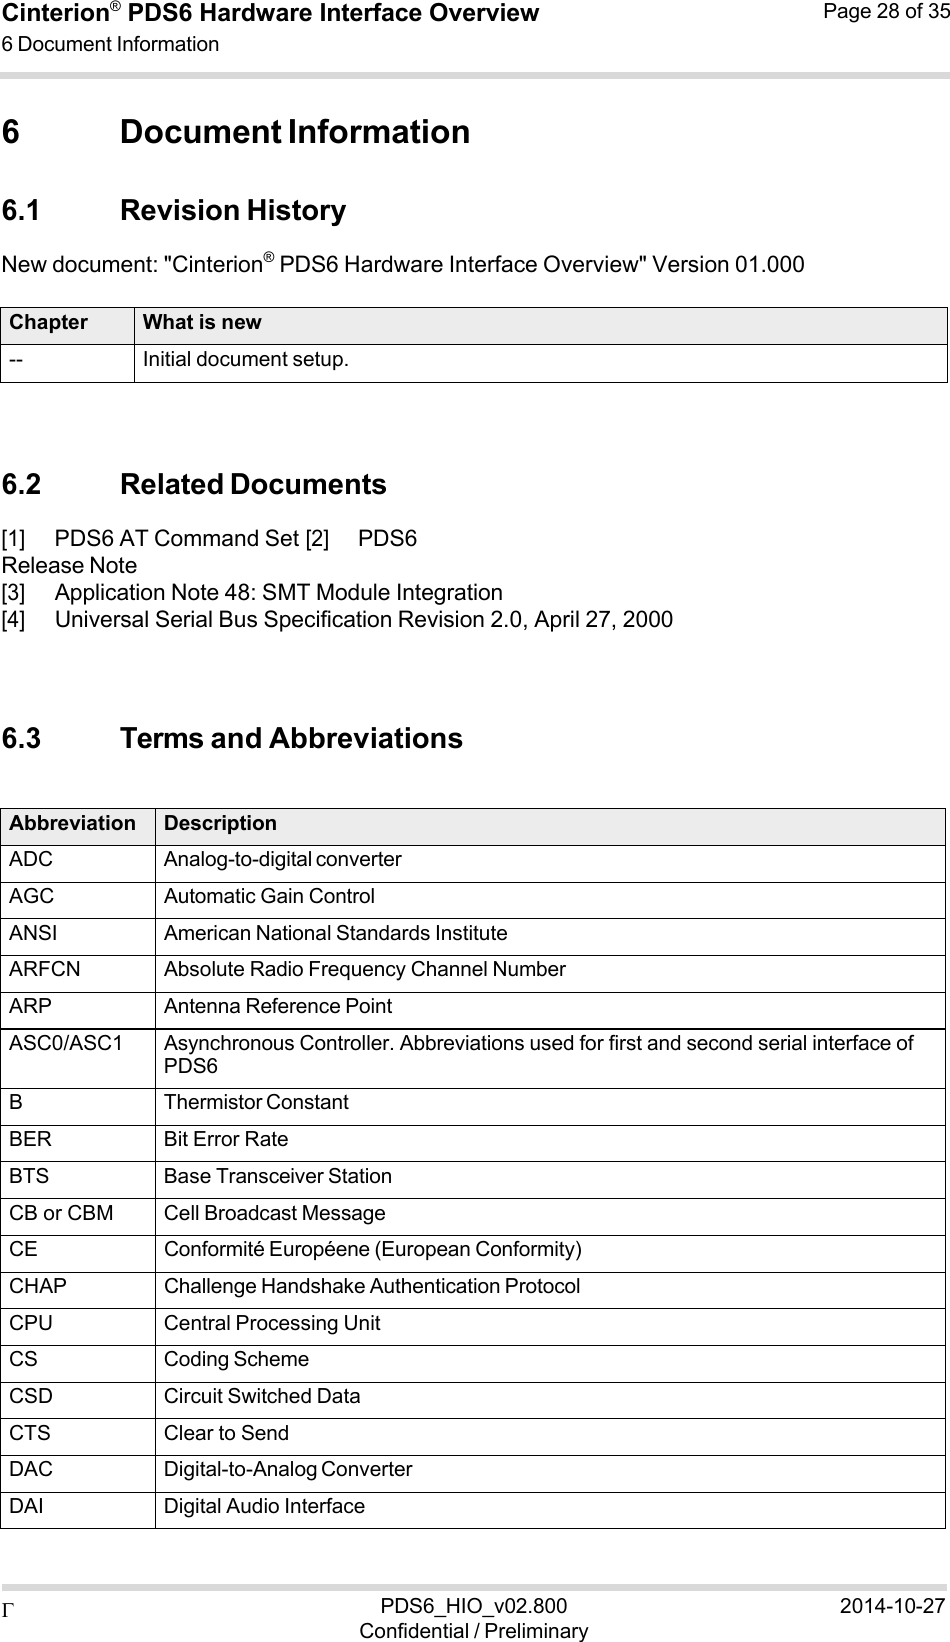  PDS6_HIO_v02.800Confidential / Preliminary2014-10-27Cinterion®  PDS6 Hardware Interface Overview 6 Document Information Page 28 of 35   6 Document Information  6.1 Revision History New document: &quot;Cinterion® PDS6 Hardware Interface Overview&quot; Version 01.000  Chapter What is new -- Initial document setup.    6.2 Related Documents [1] PDS6 AT Command Set [2] PDS6 Release Note [3] Application Note 48: SMT Module Integration [4] Universal Serial Bus Specification Revision 2.0, April 27, 2000    6.3 Terms and Abbreviations   Abbreviation Description ADC Analog-to-digital converterAGC Automatic Gain ControlANSI American National Standards InstituteARFCN Absolute Radio Frequency Channel NumberARP Antenna Reference PointASC0/ASC1 Asynchronous Controller. Abbreviations used for first and second serial interface of PDS6 B Thermistor Constant BER Bit Error Rate BTS Base Transceiver StationCB or CBM Cell Broadcast MessageCE Conformité Européene (European Conformity)CHAP Challenge Handshake Authentication ProtocolCPU Central Processing UnitCS Coding Scheme CSD Circuit Switched Data CTS Clear to Send DAC Digital-to-Analog ConverterDAI Digital Audio Interface 